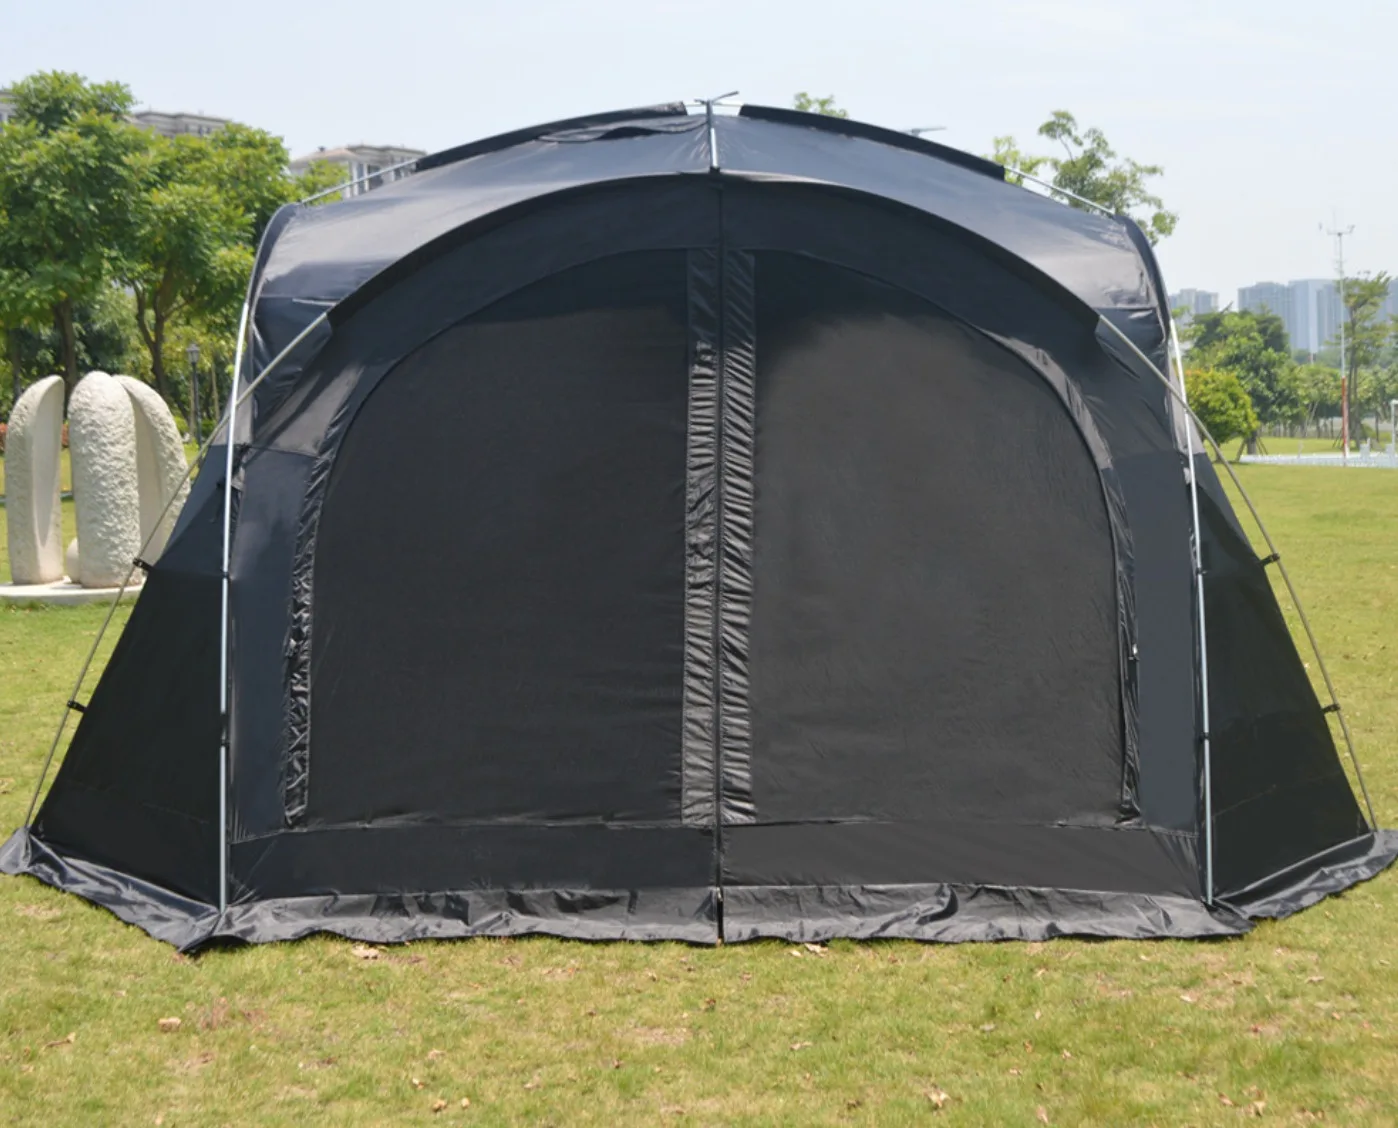 Outdoor camping shelter blackcoating family  dome Tent Camping Equipment images - 6